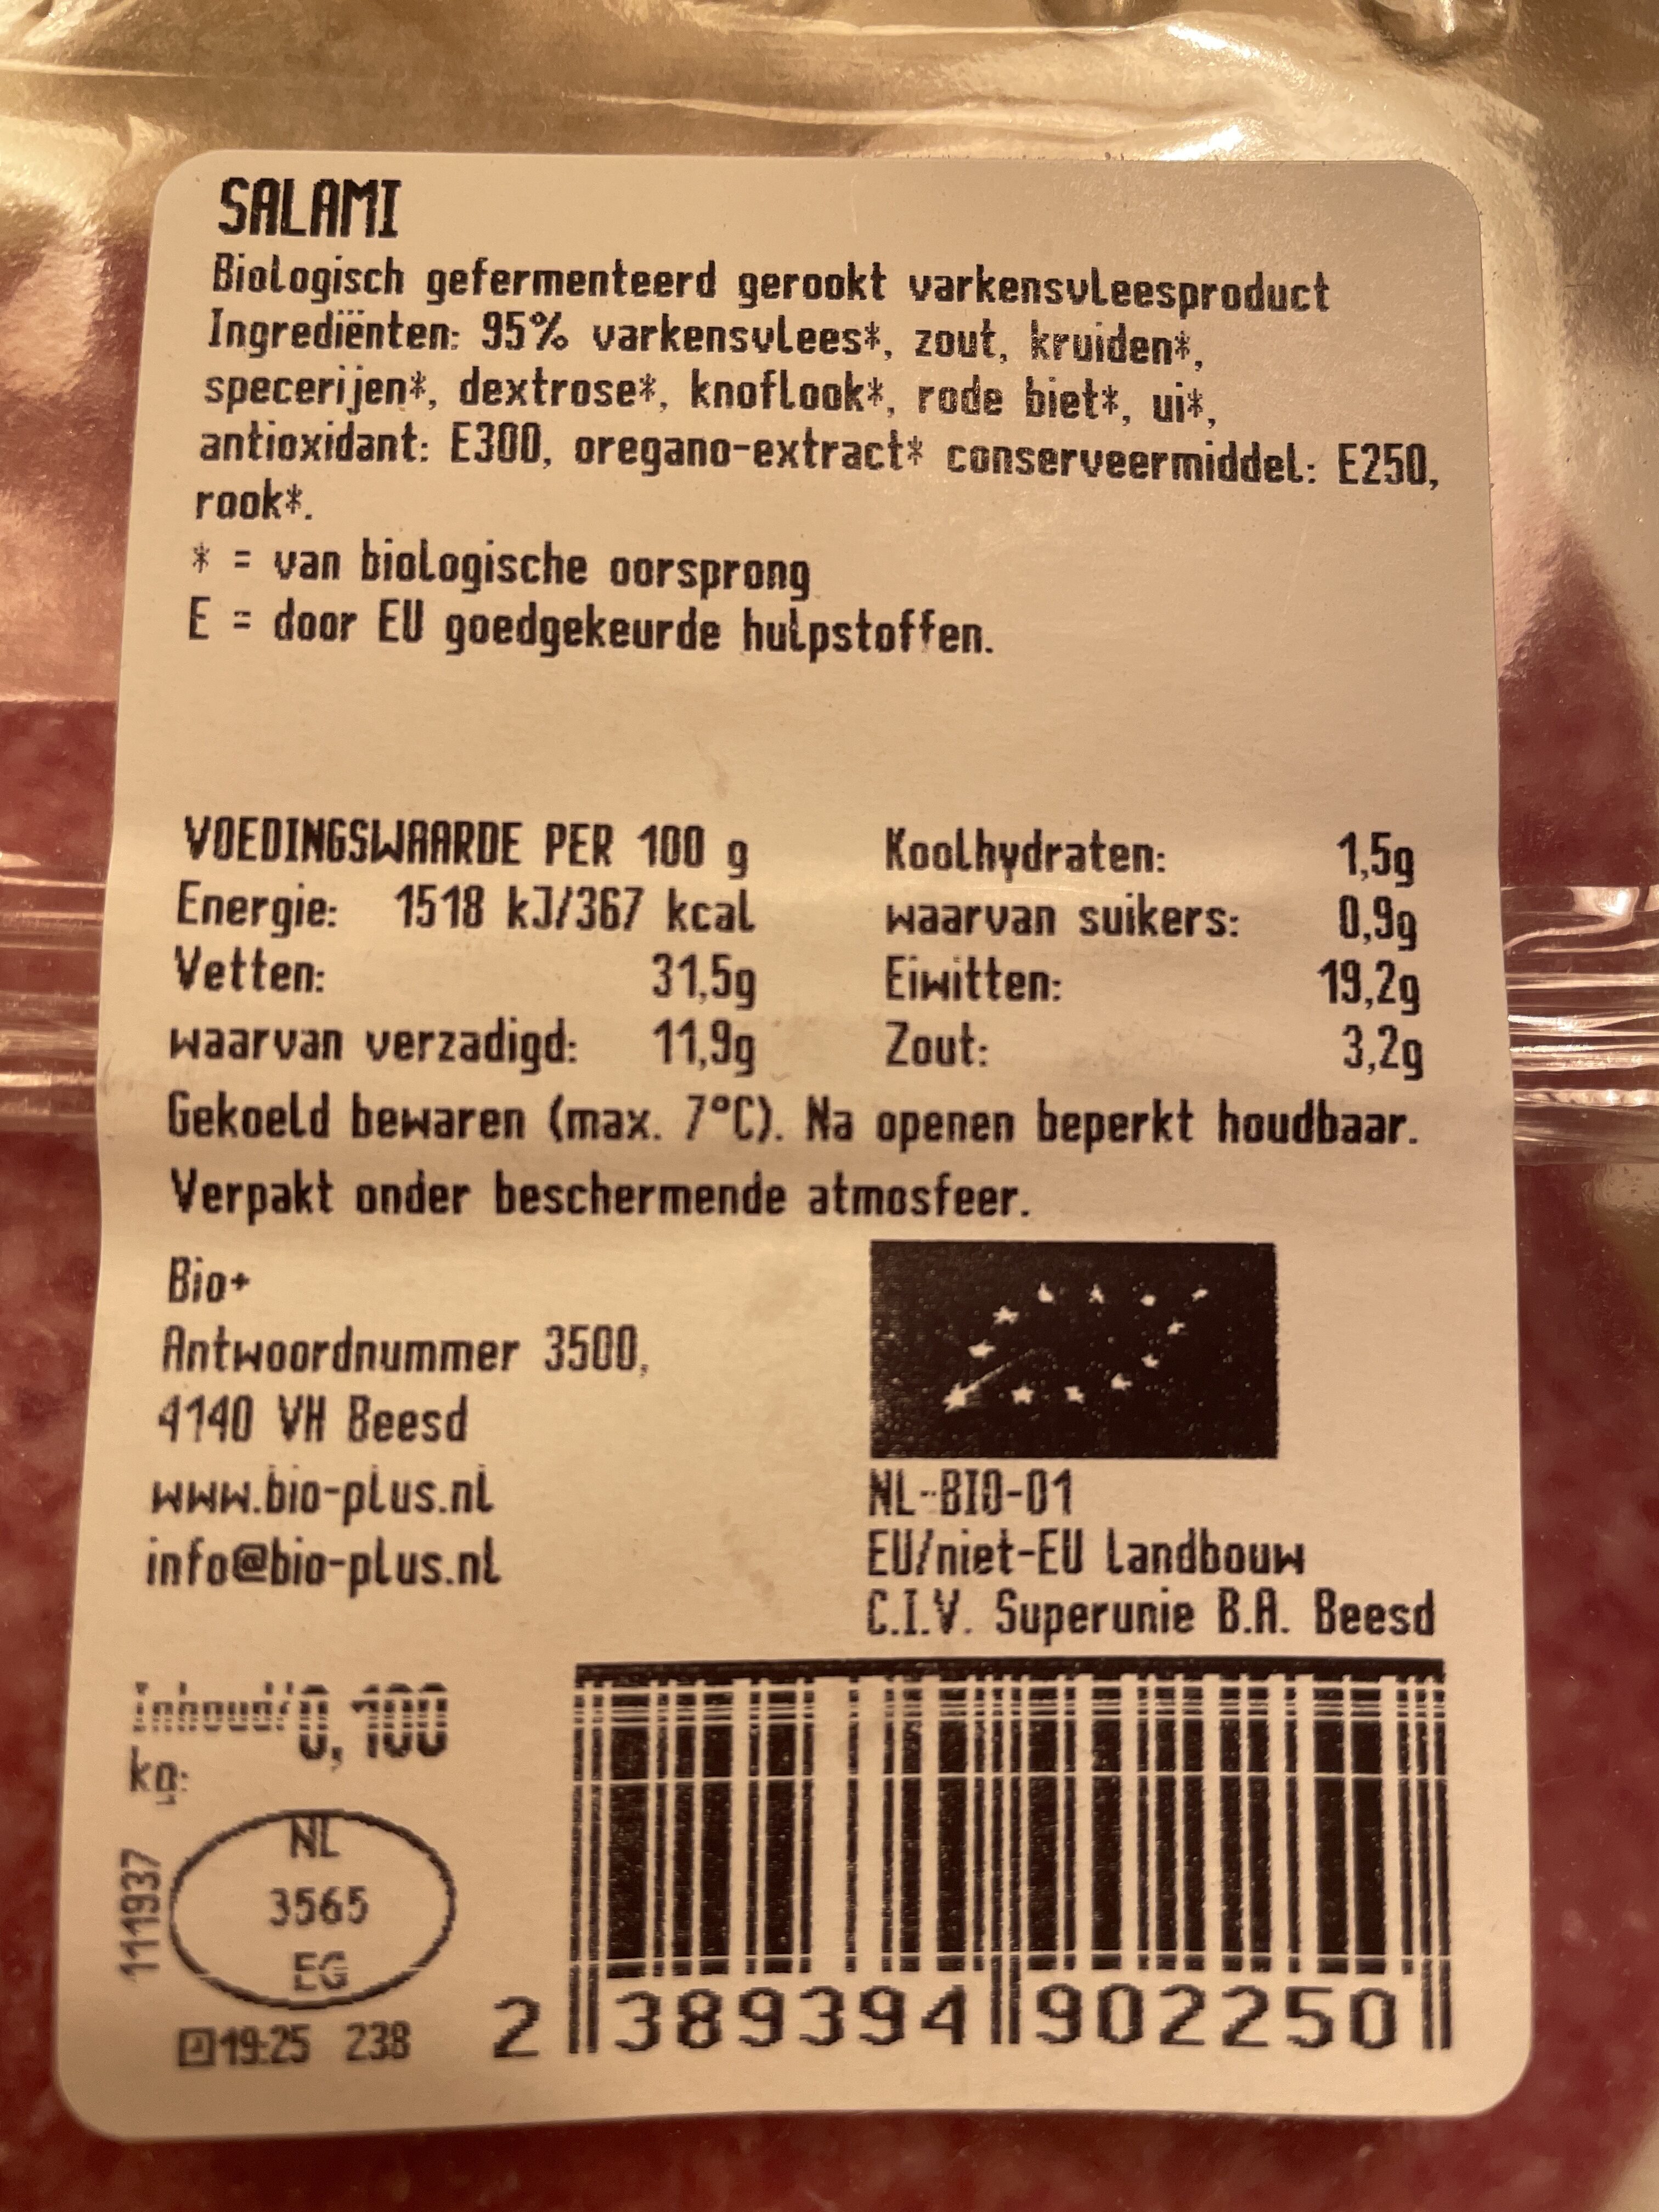 Bio+ Salami - Recycling instructions and/or packaging information